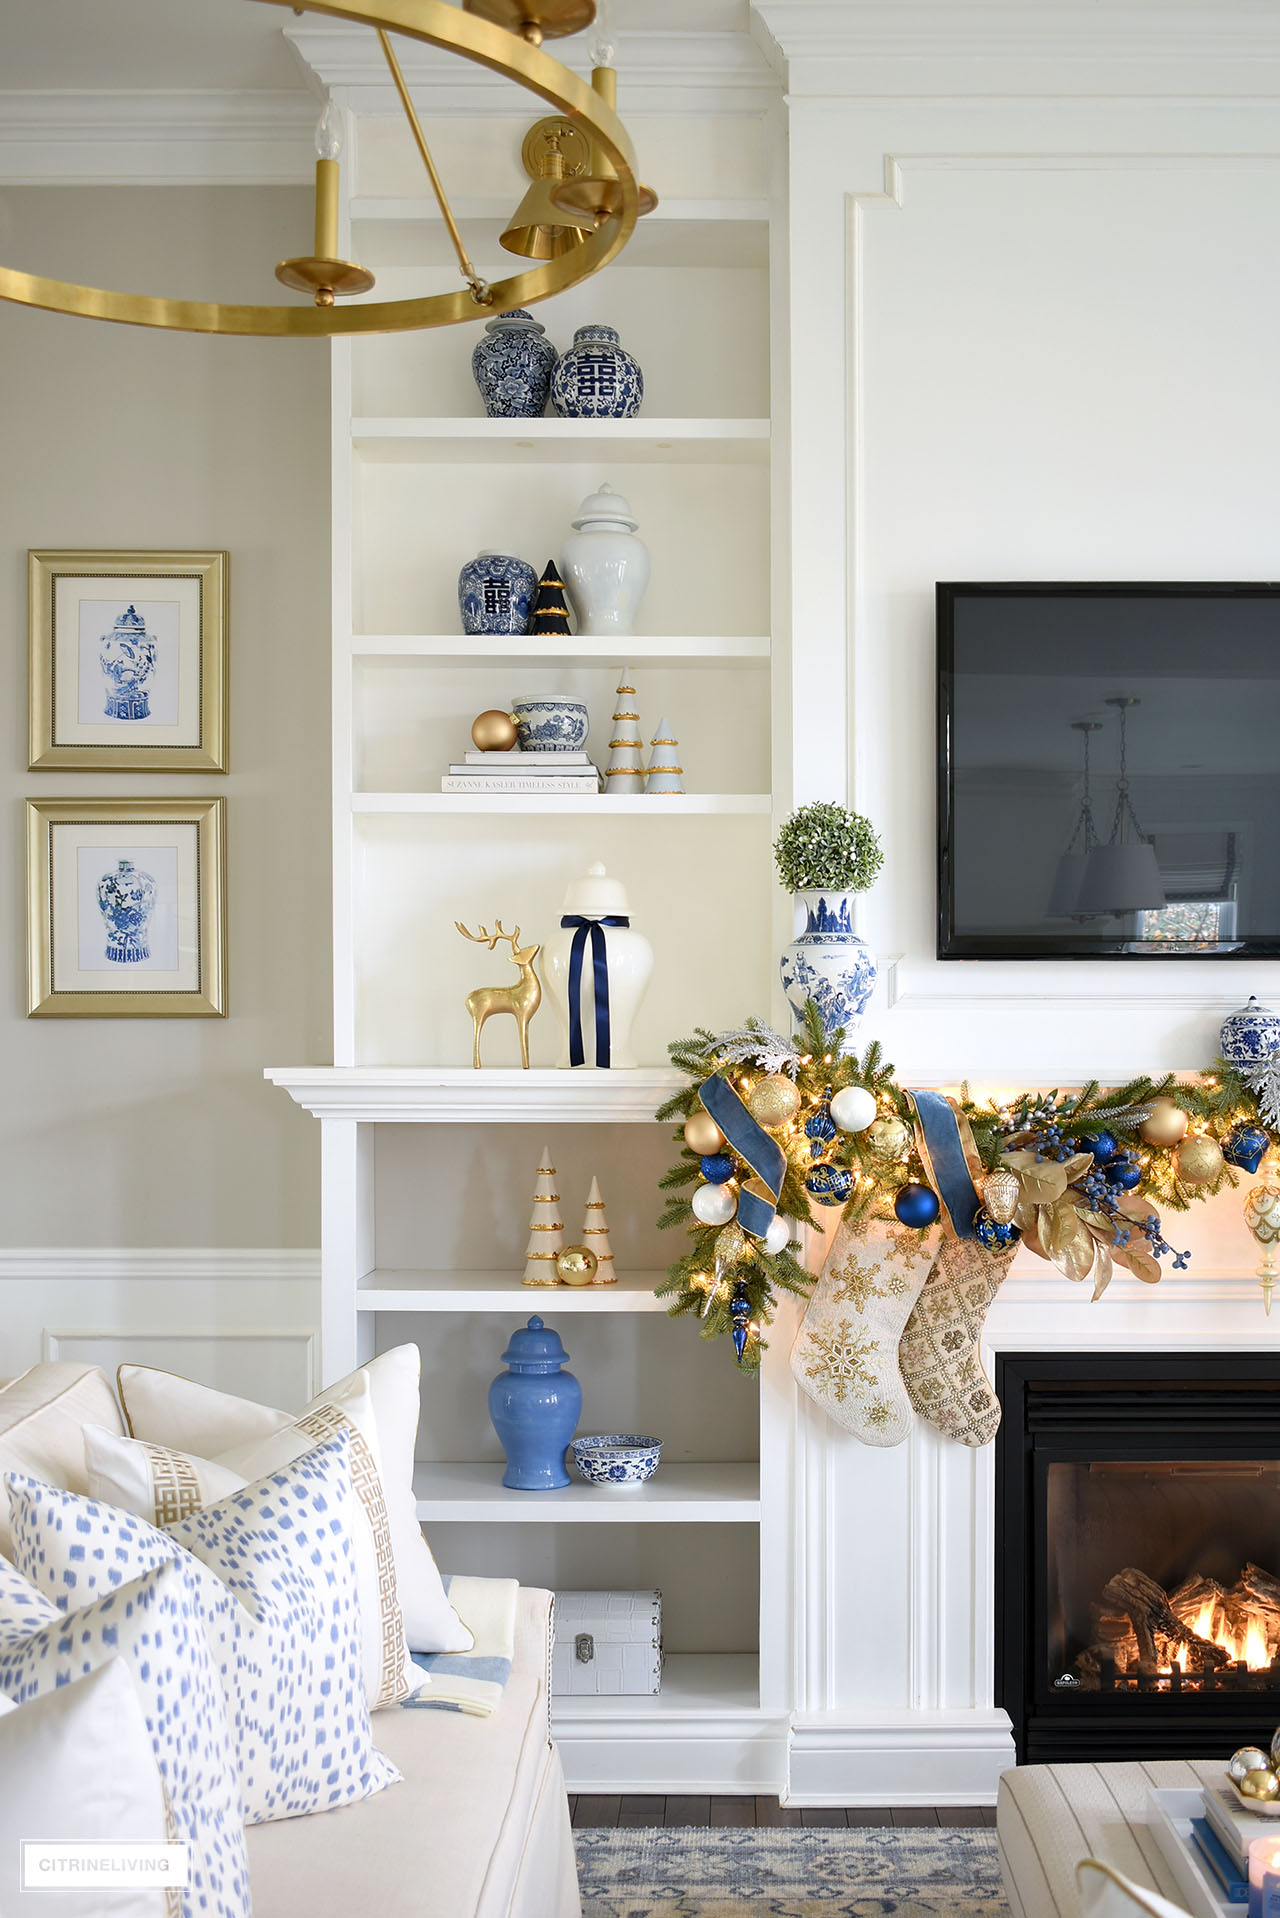 Shelves with blue and white and gold decor styled for christmas, featuring ginger jars, ceramic christmas trees with gold edges, reindeer and blue and white chinoiserie ceramic pieces.